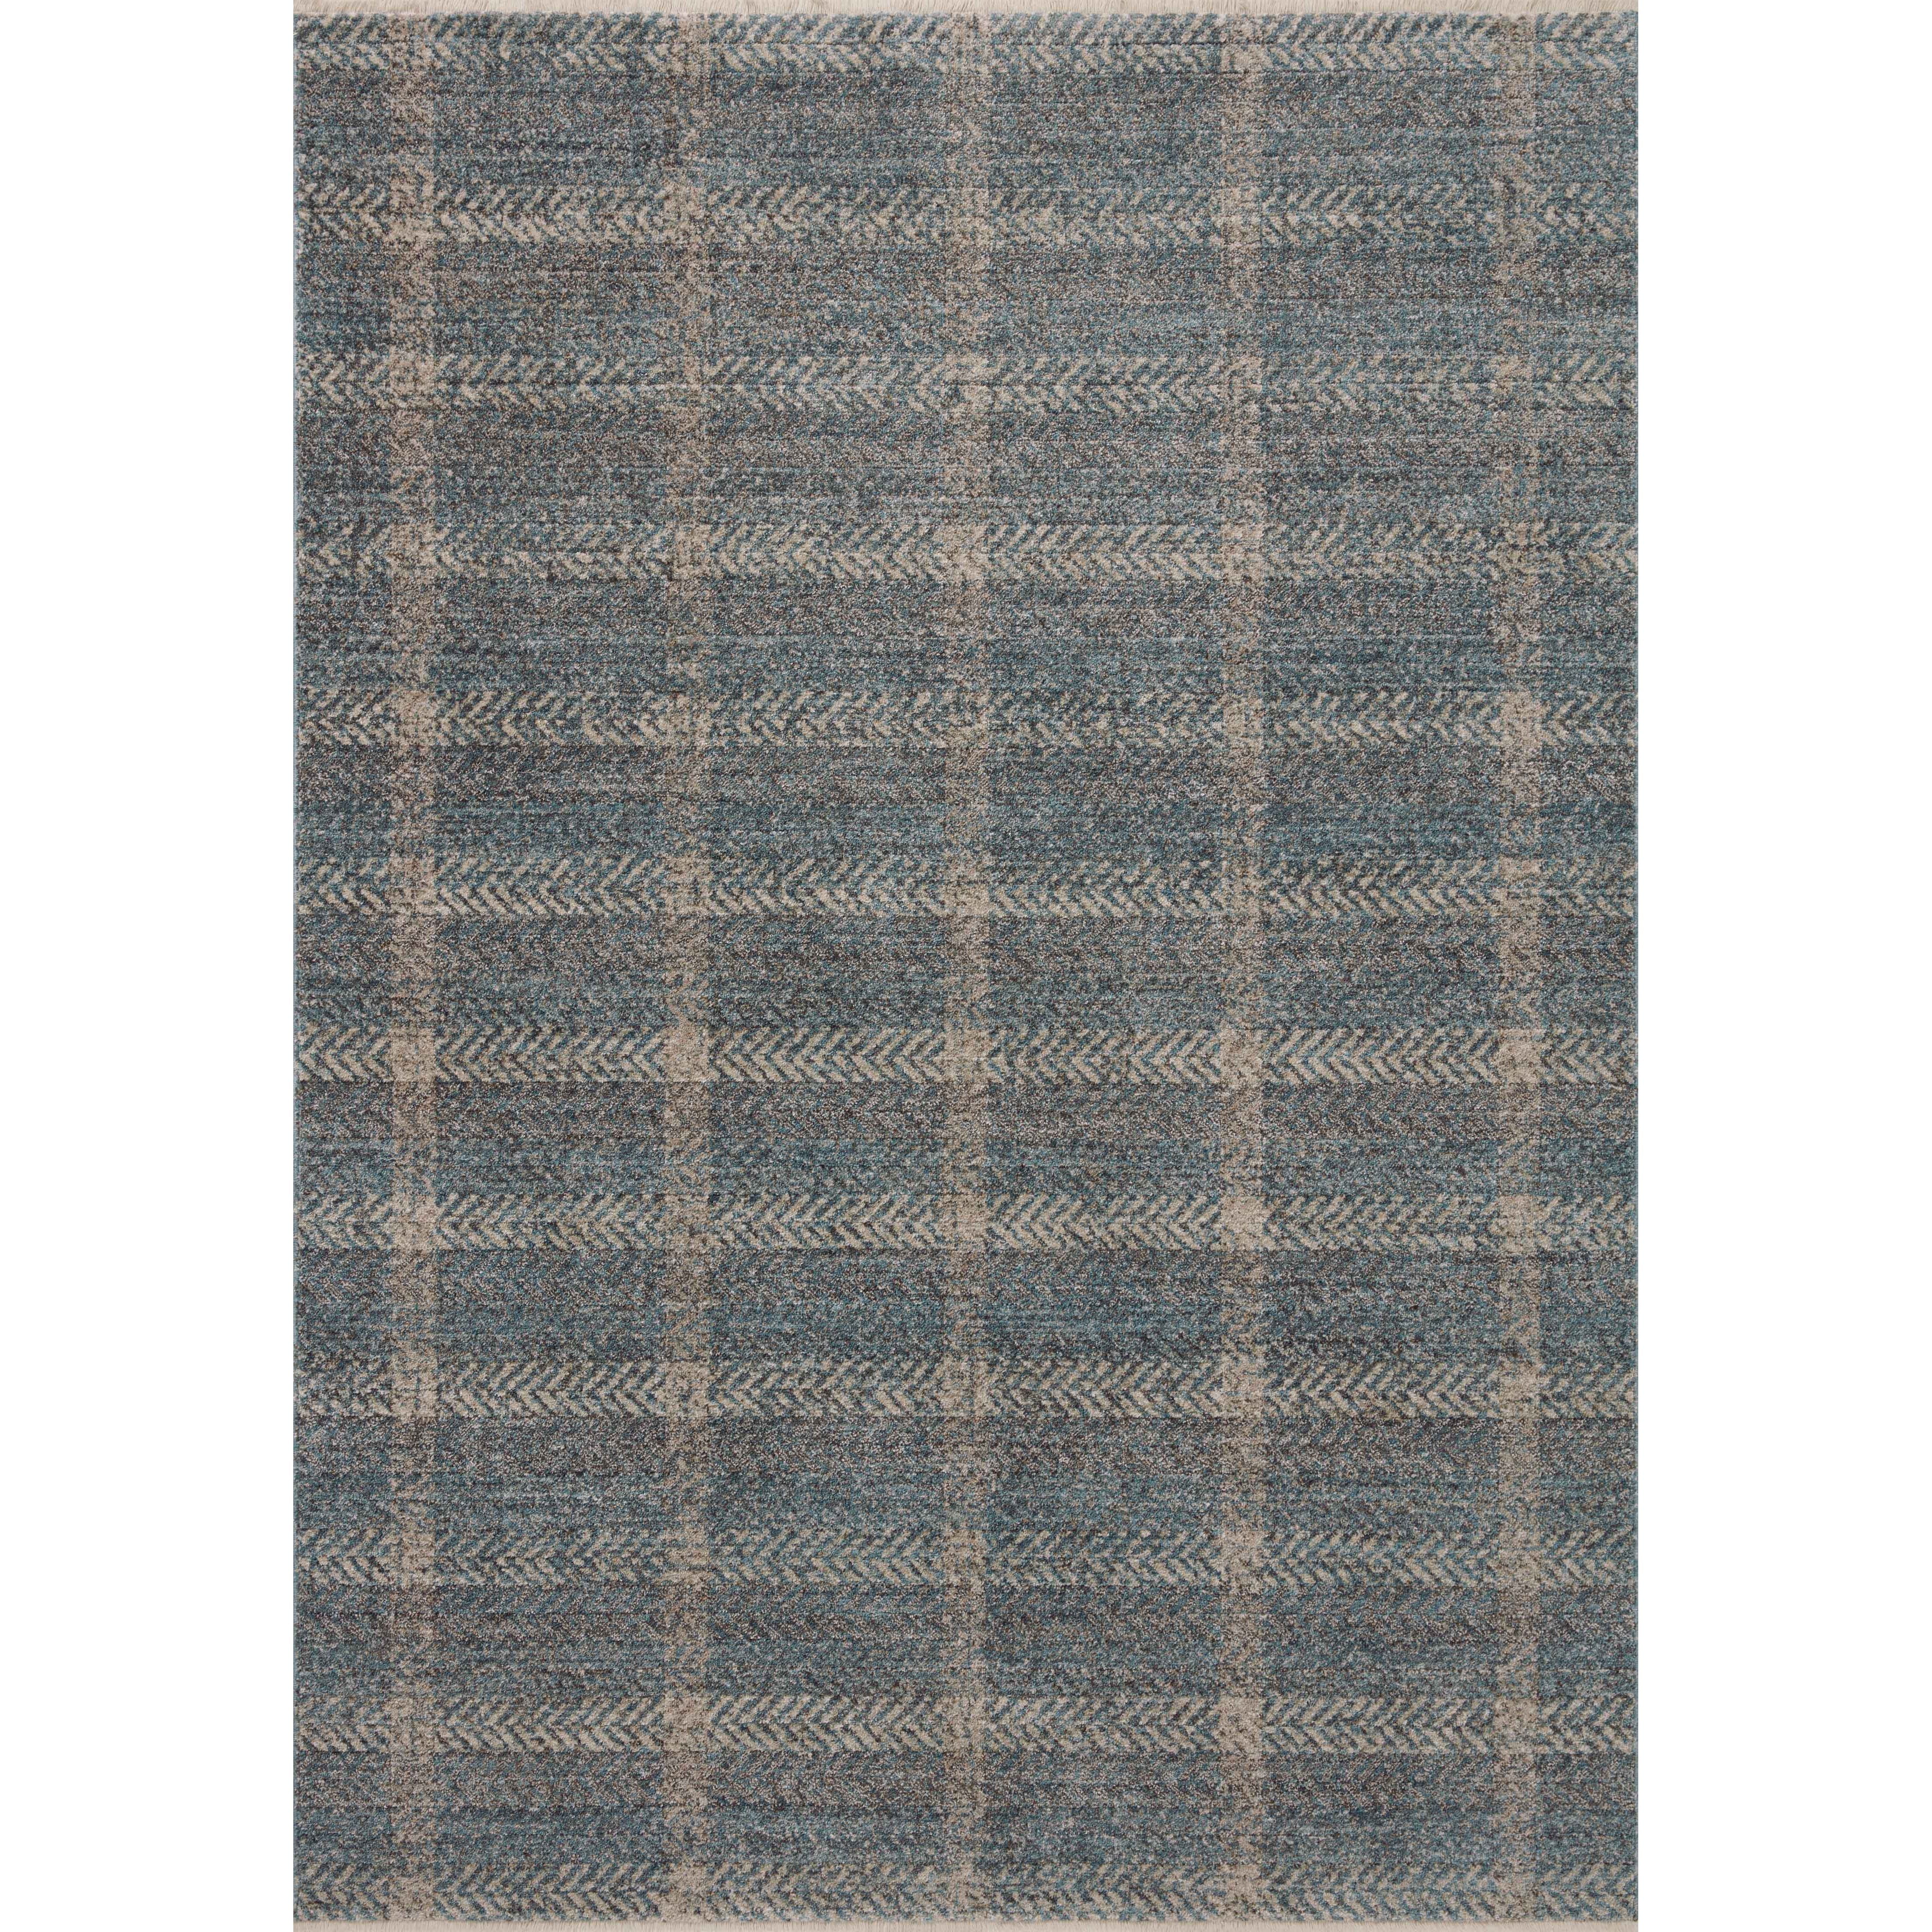 The Ember Collection by Angela Rose x Loloi is a modern flatweave area rug with a timeless plaid pattern that adds depth and coziness to any living room, bedroom, dining room, or hallway. Ember is power-loomed of 100% space-dyed polyester, a durable construction that creates a nuanced depth of color, available in a range of neutral palettes. Amethyst Home provides interior design, new home construction design consulting, vintage area rugs, and lighting in the Tampa metro area.